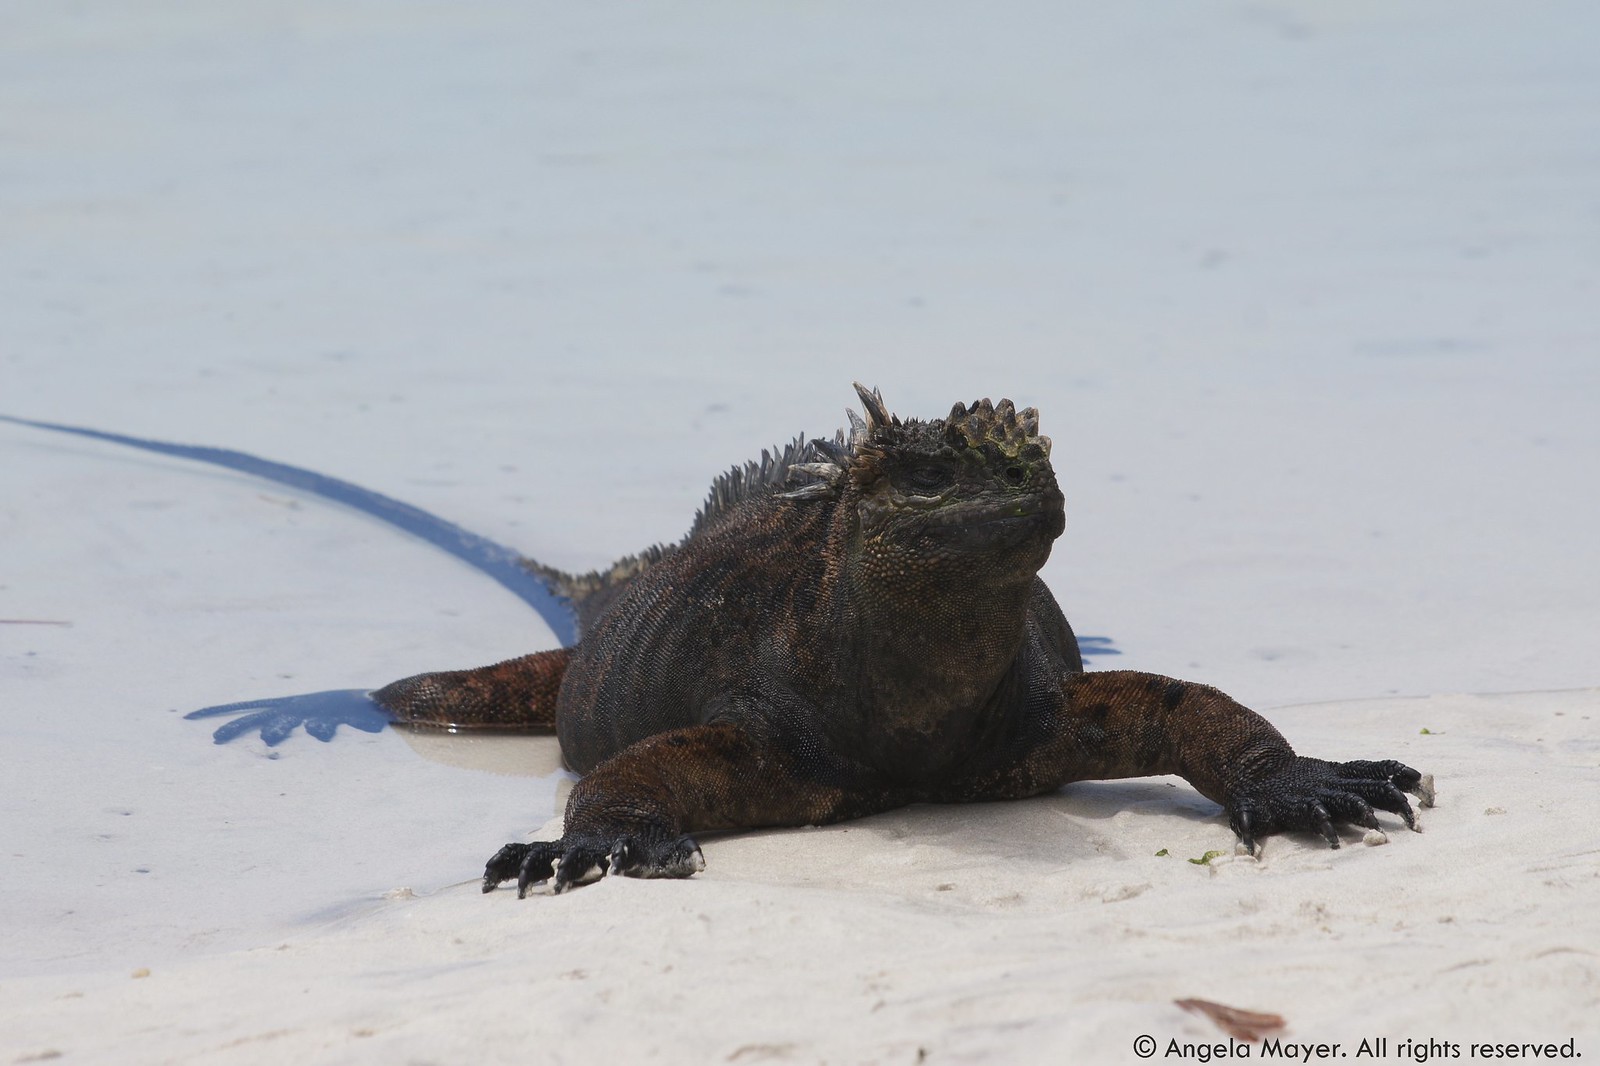 Iguana - Crawling out of the Water